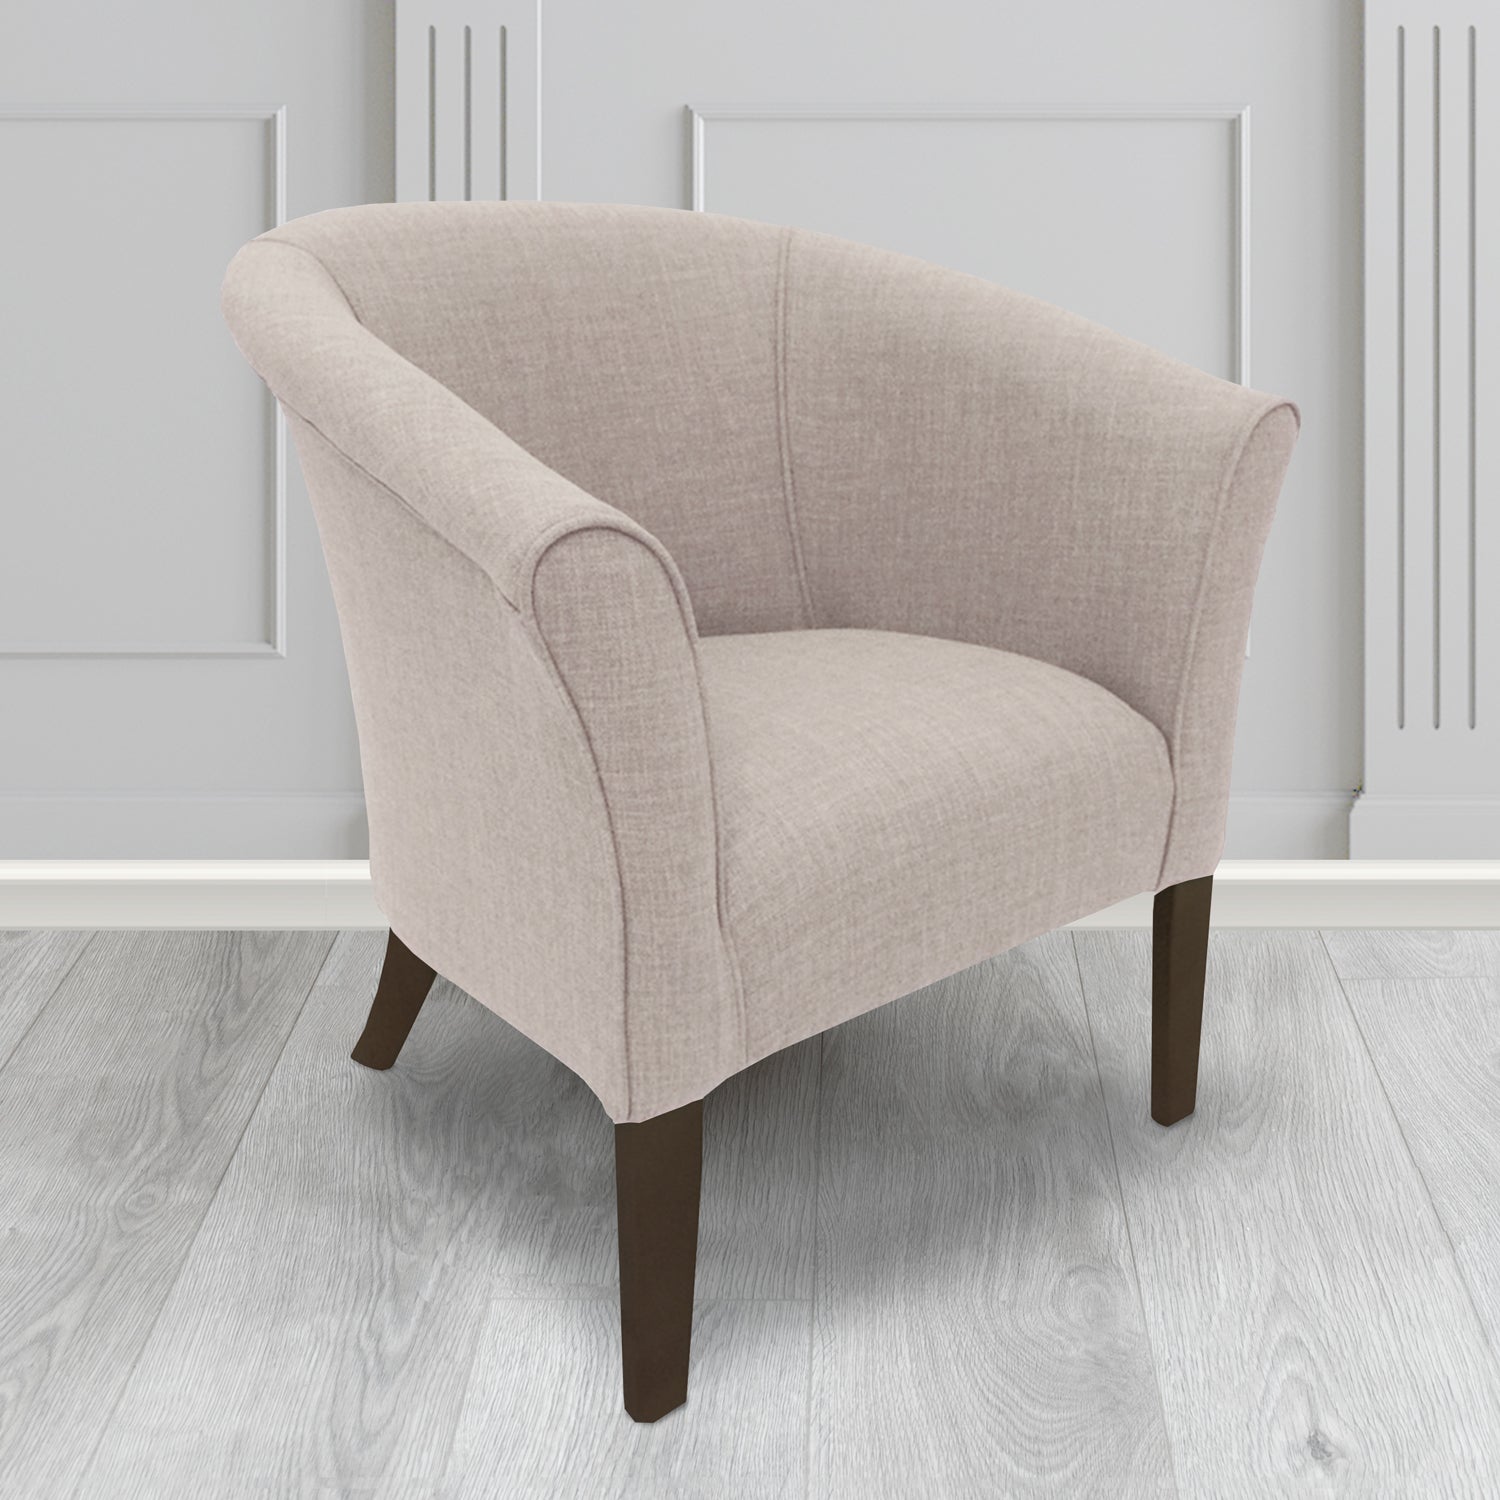 Quill Tub Chair in Linetta Silver Crib 5 Plain Fabric - Antimicrobial, Stain Resistant & Waterproof - The Tub Chair Shop